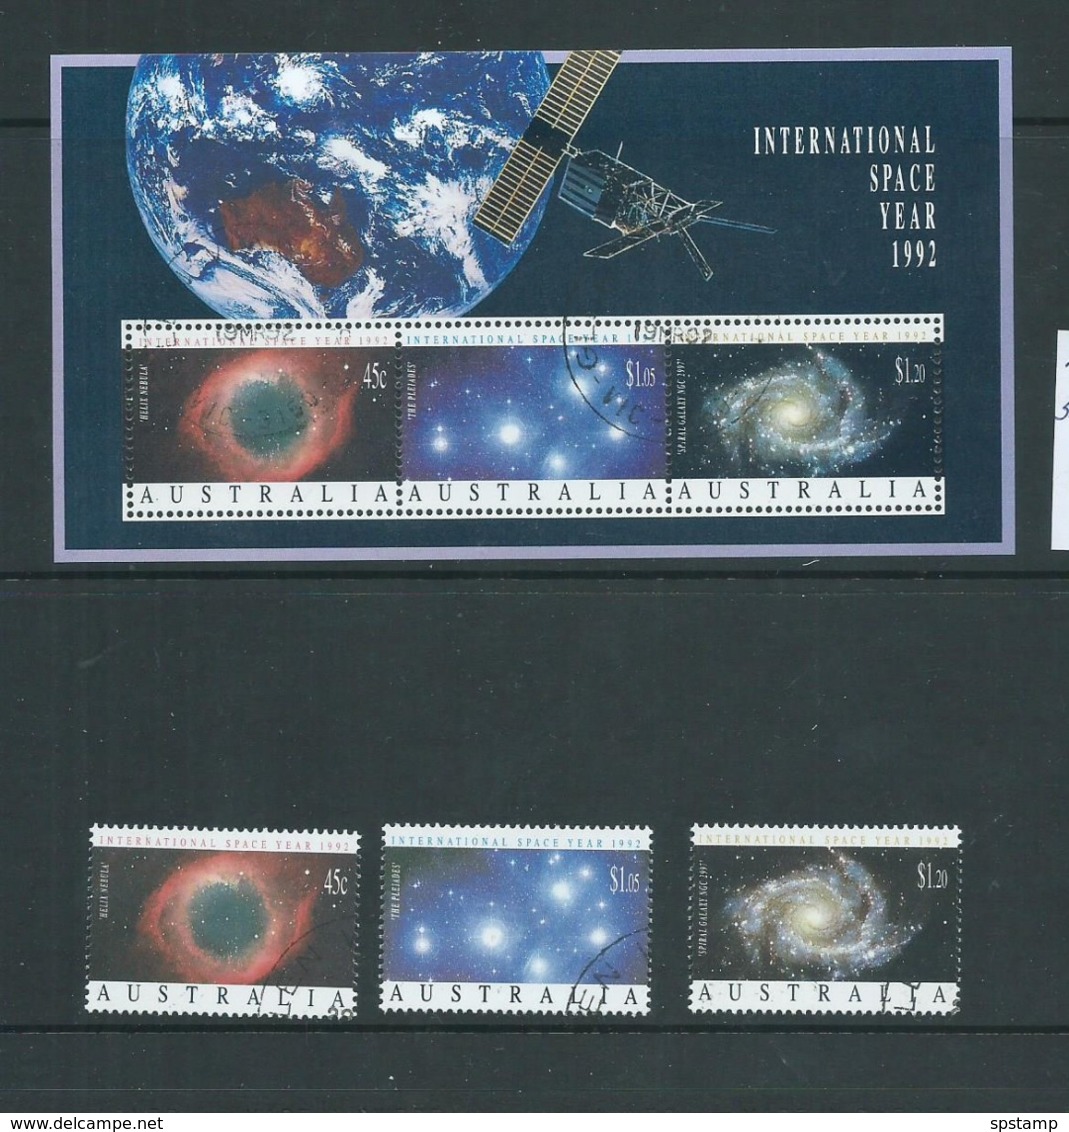 Australia 1992 International Space Year Set Of 3 & Miniature Sheet Fine CTO With Gum - Used Stamps